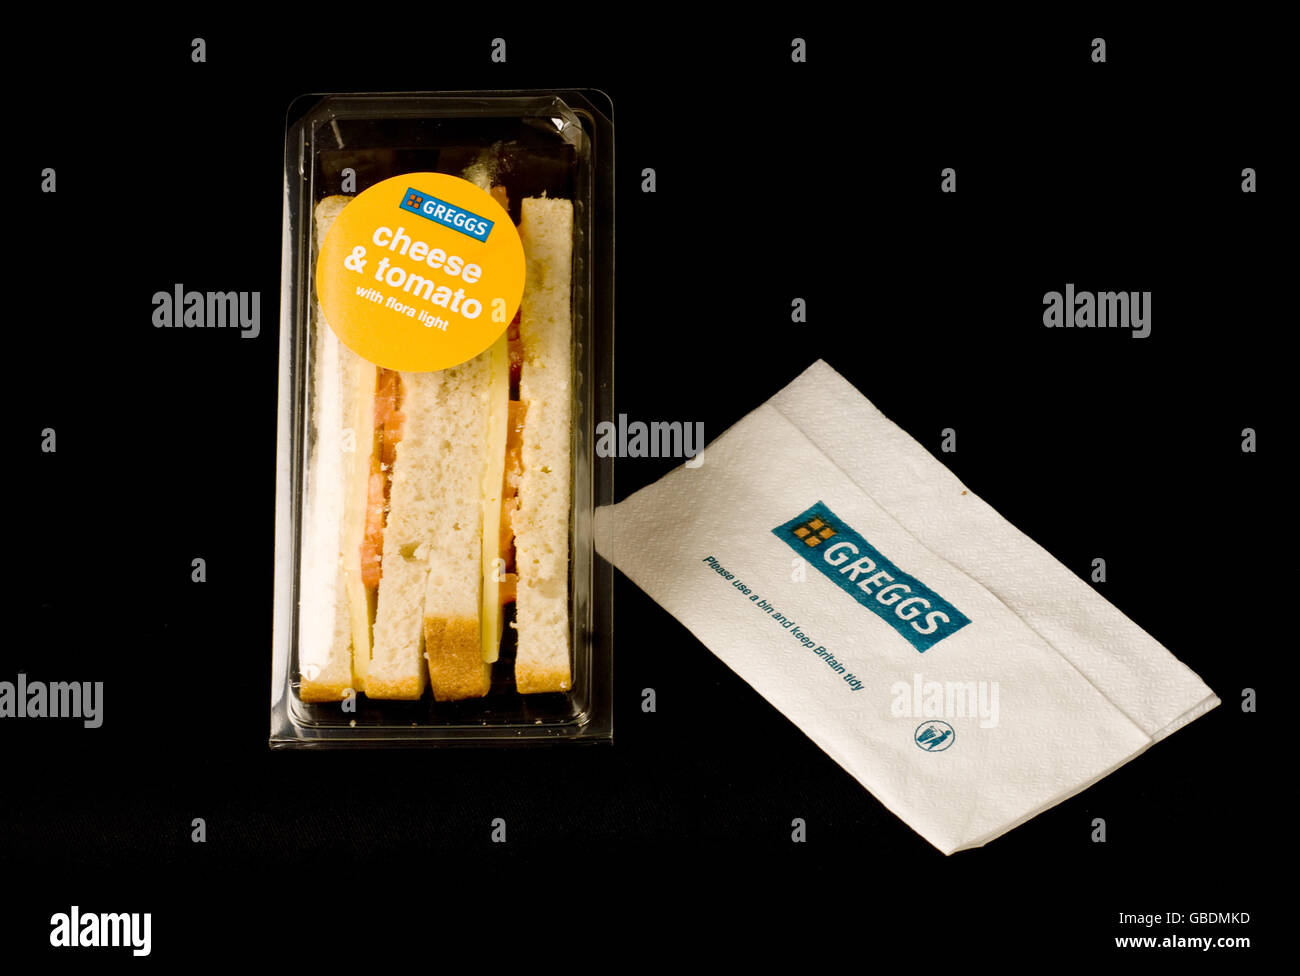 A Greggs cheese and tomato sandwich - Consumers worried about the state of their wallets appear to be turning away from more conventional restaurants and staying at home with a take-away instead. And while the rest of the high street struggles for survival, fast food chains are enjoying a surge in popularity. Greggs' chief executive Ken McMeikan has said the chain's quality and low prices gave it a head start of its rivals. 'The underlying factor out there is that people are looking at the amount of money in their pocket and looking for the best value,' he said. Stock Photo